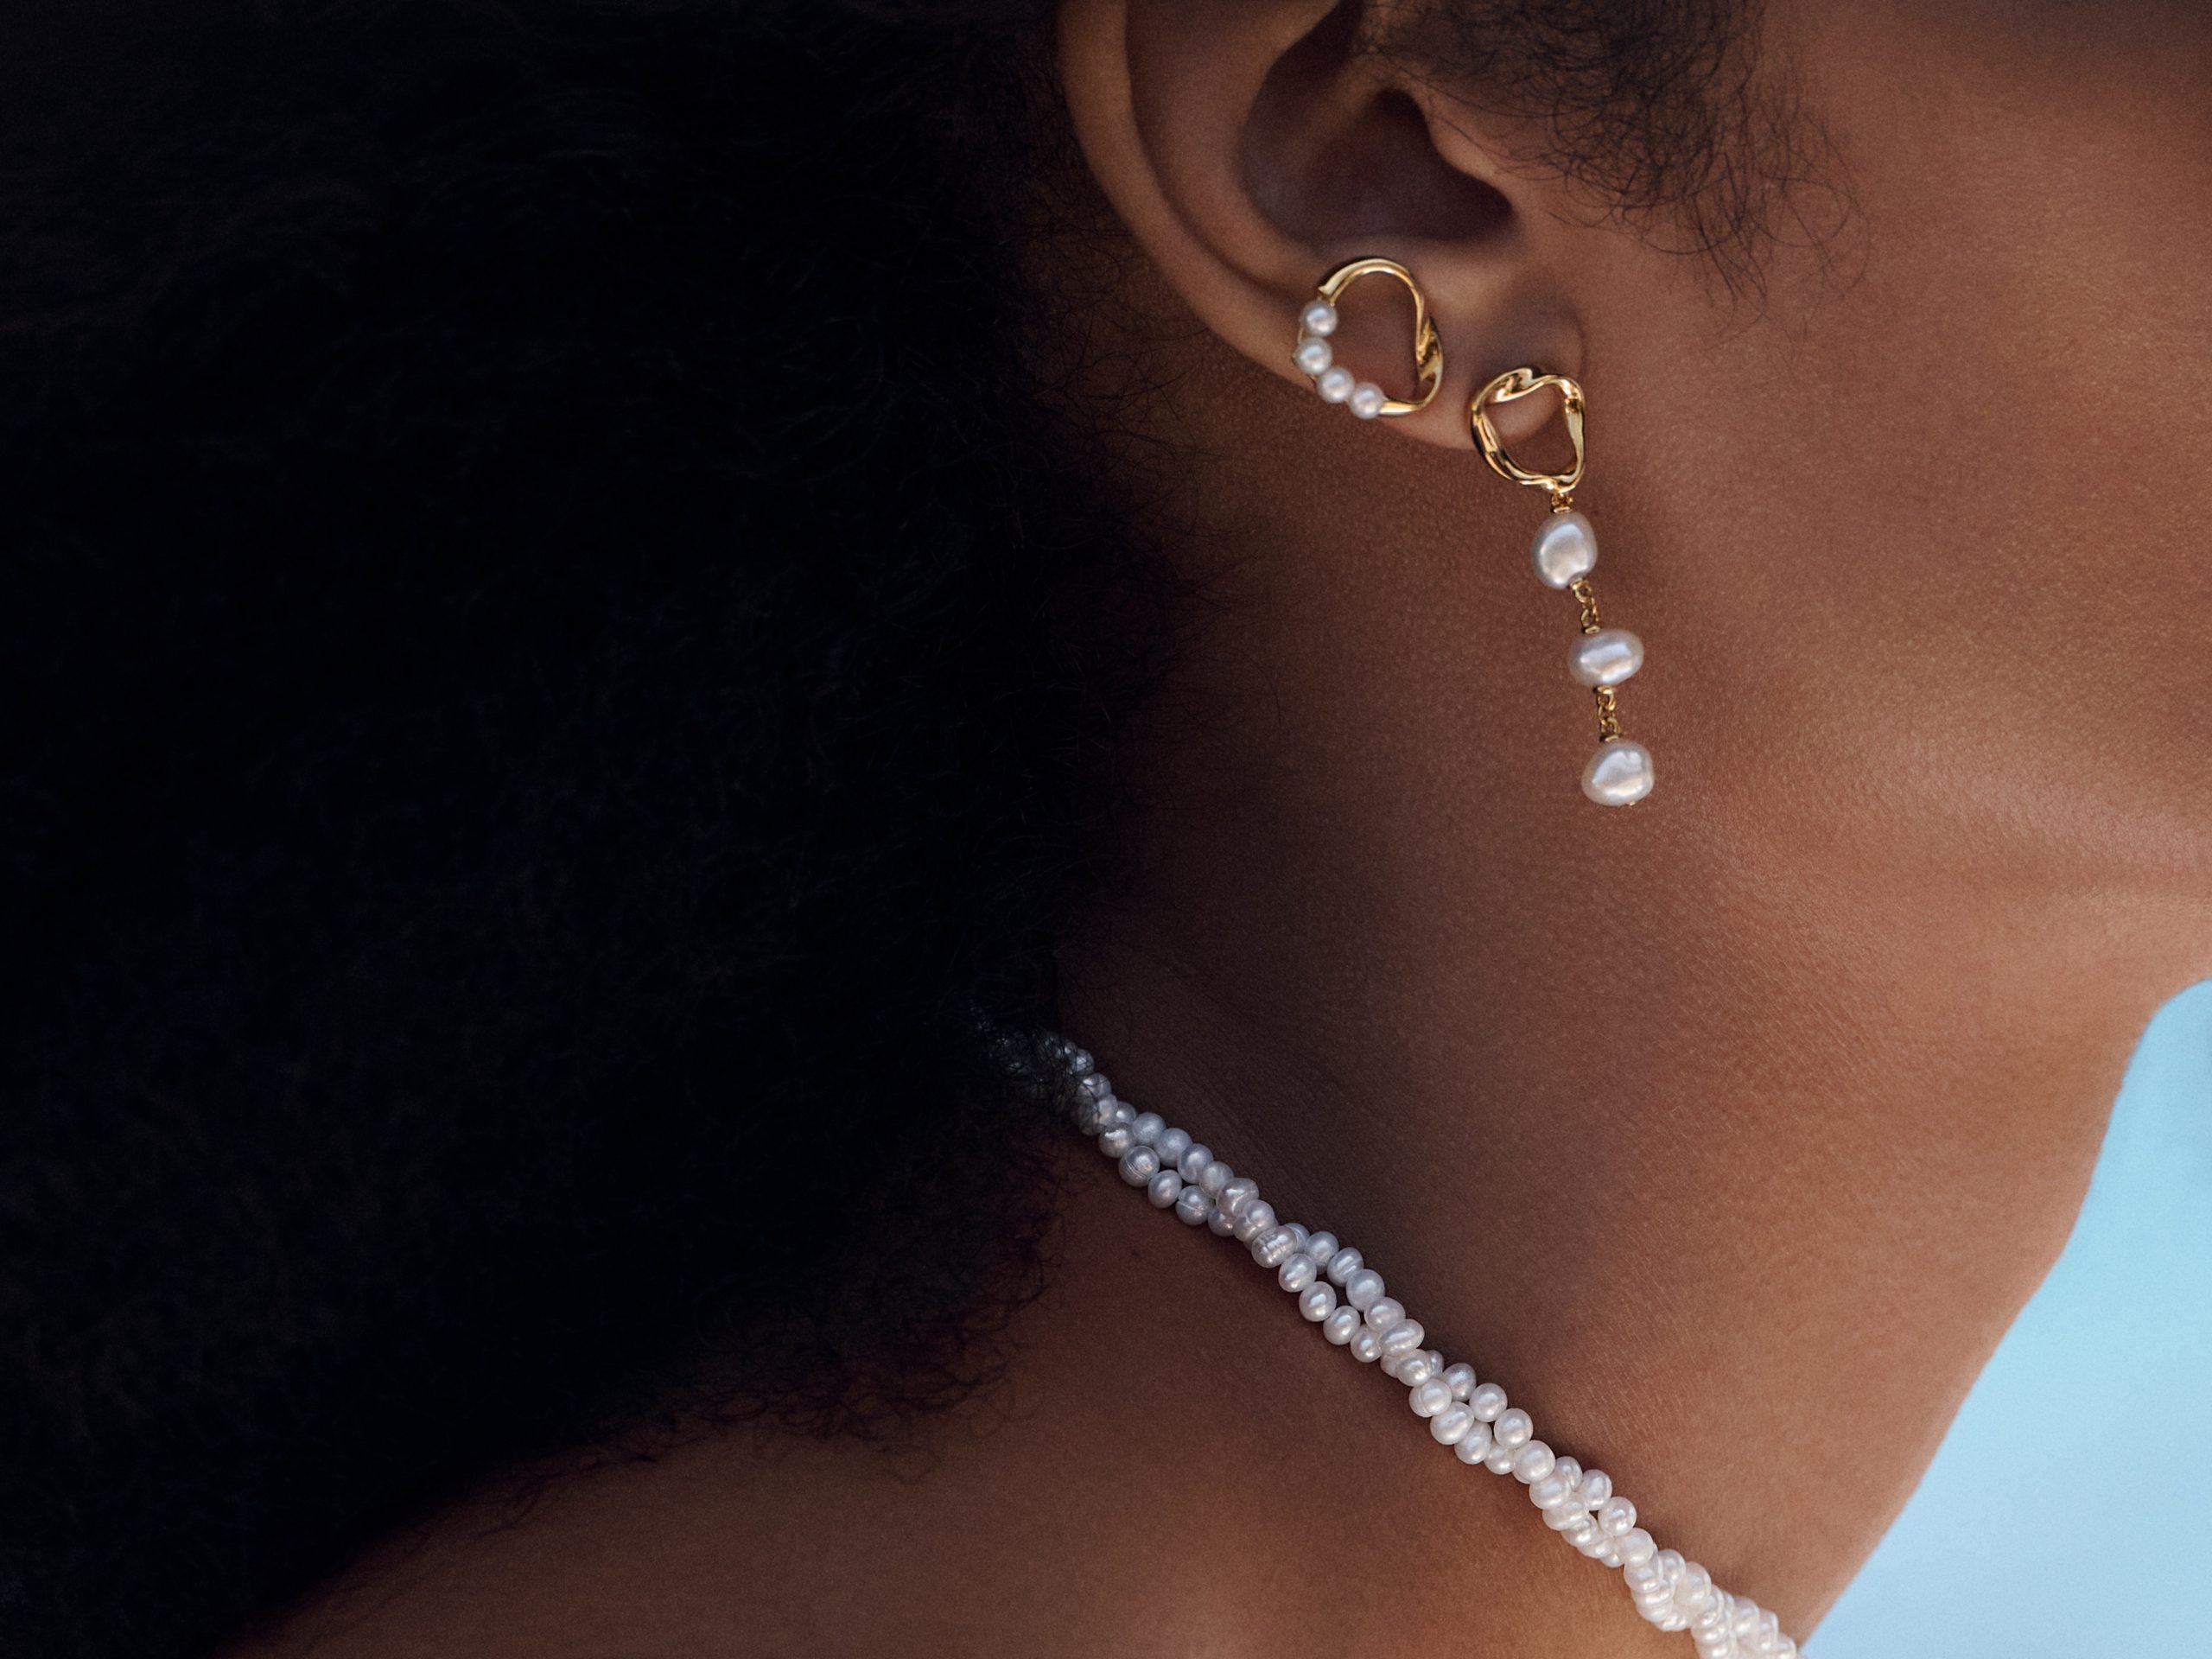 Pandora's New Collection Captures The Essence Of Minimalism